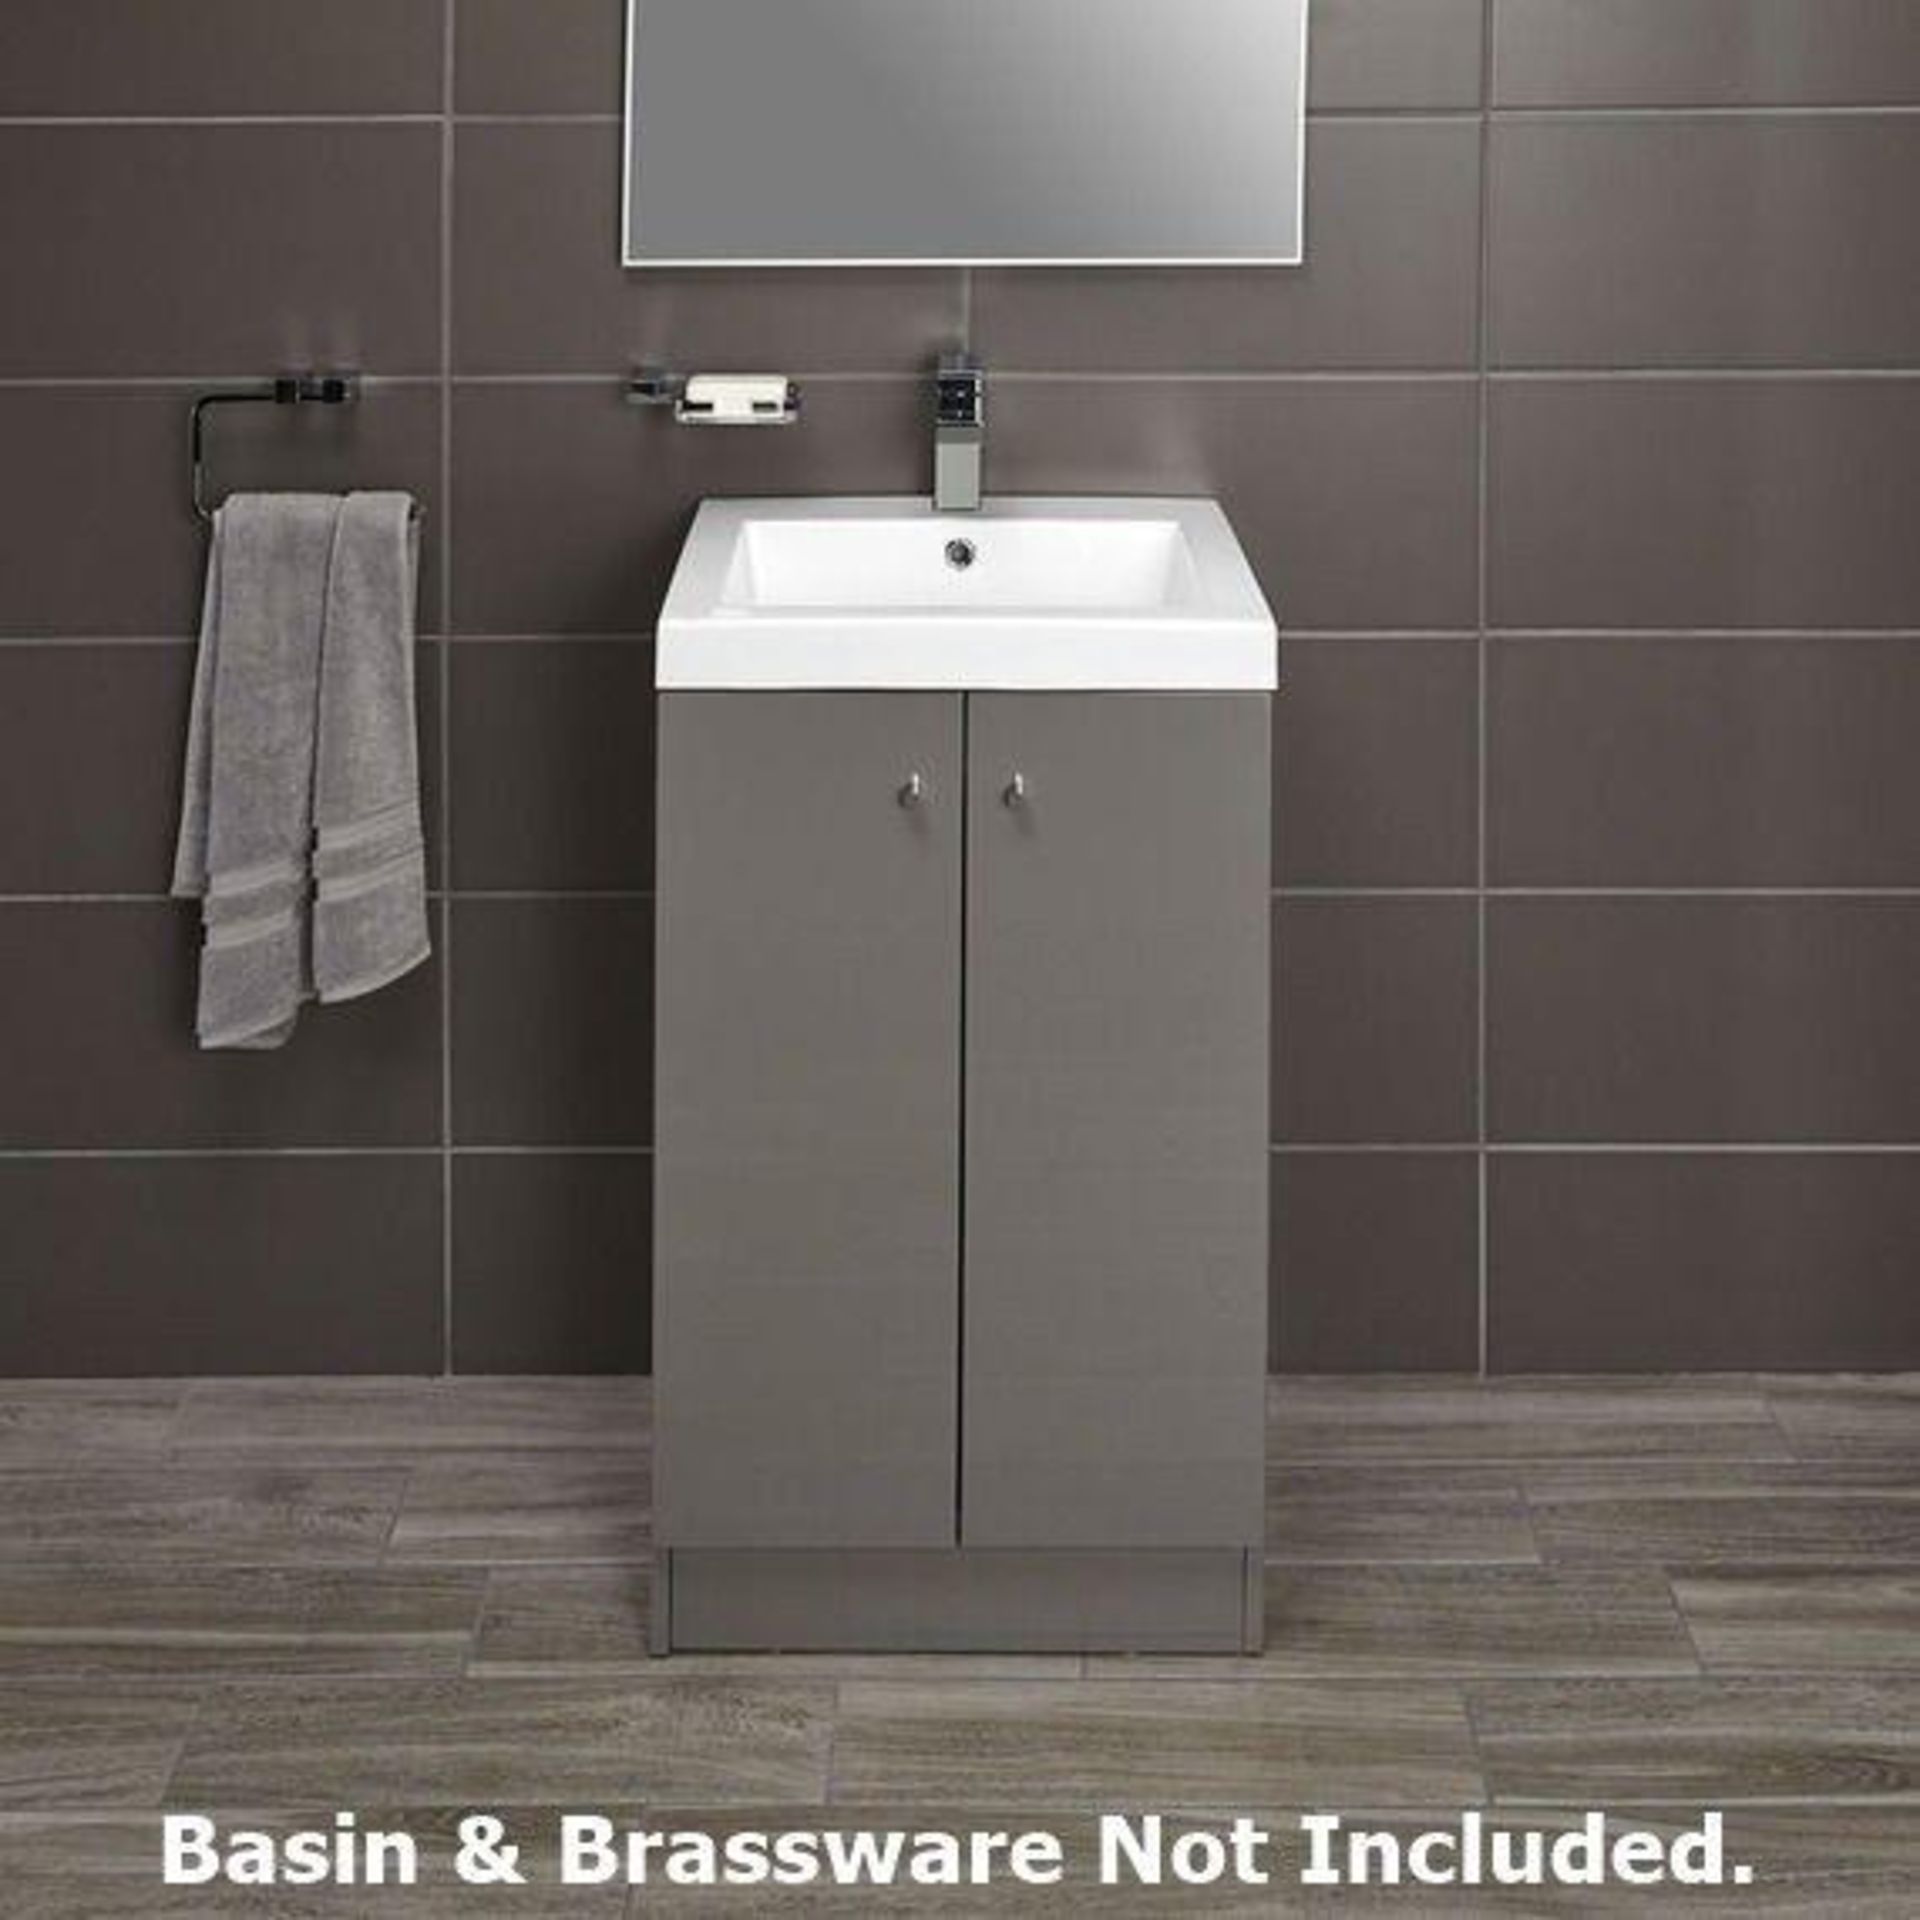 10 x Alpine Duo 500 Floor Standing Vanity Unit - Ultra-Modern Square Design With Soft Close Doors an